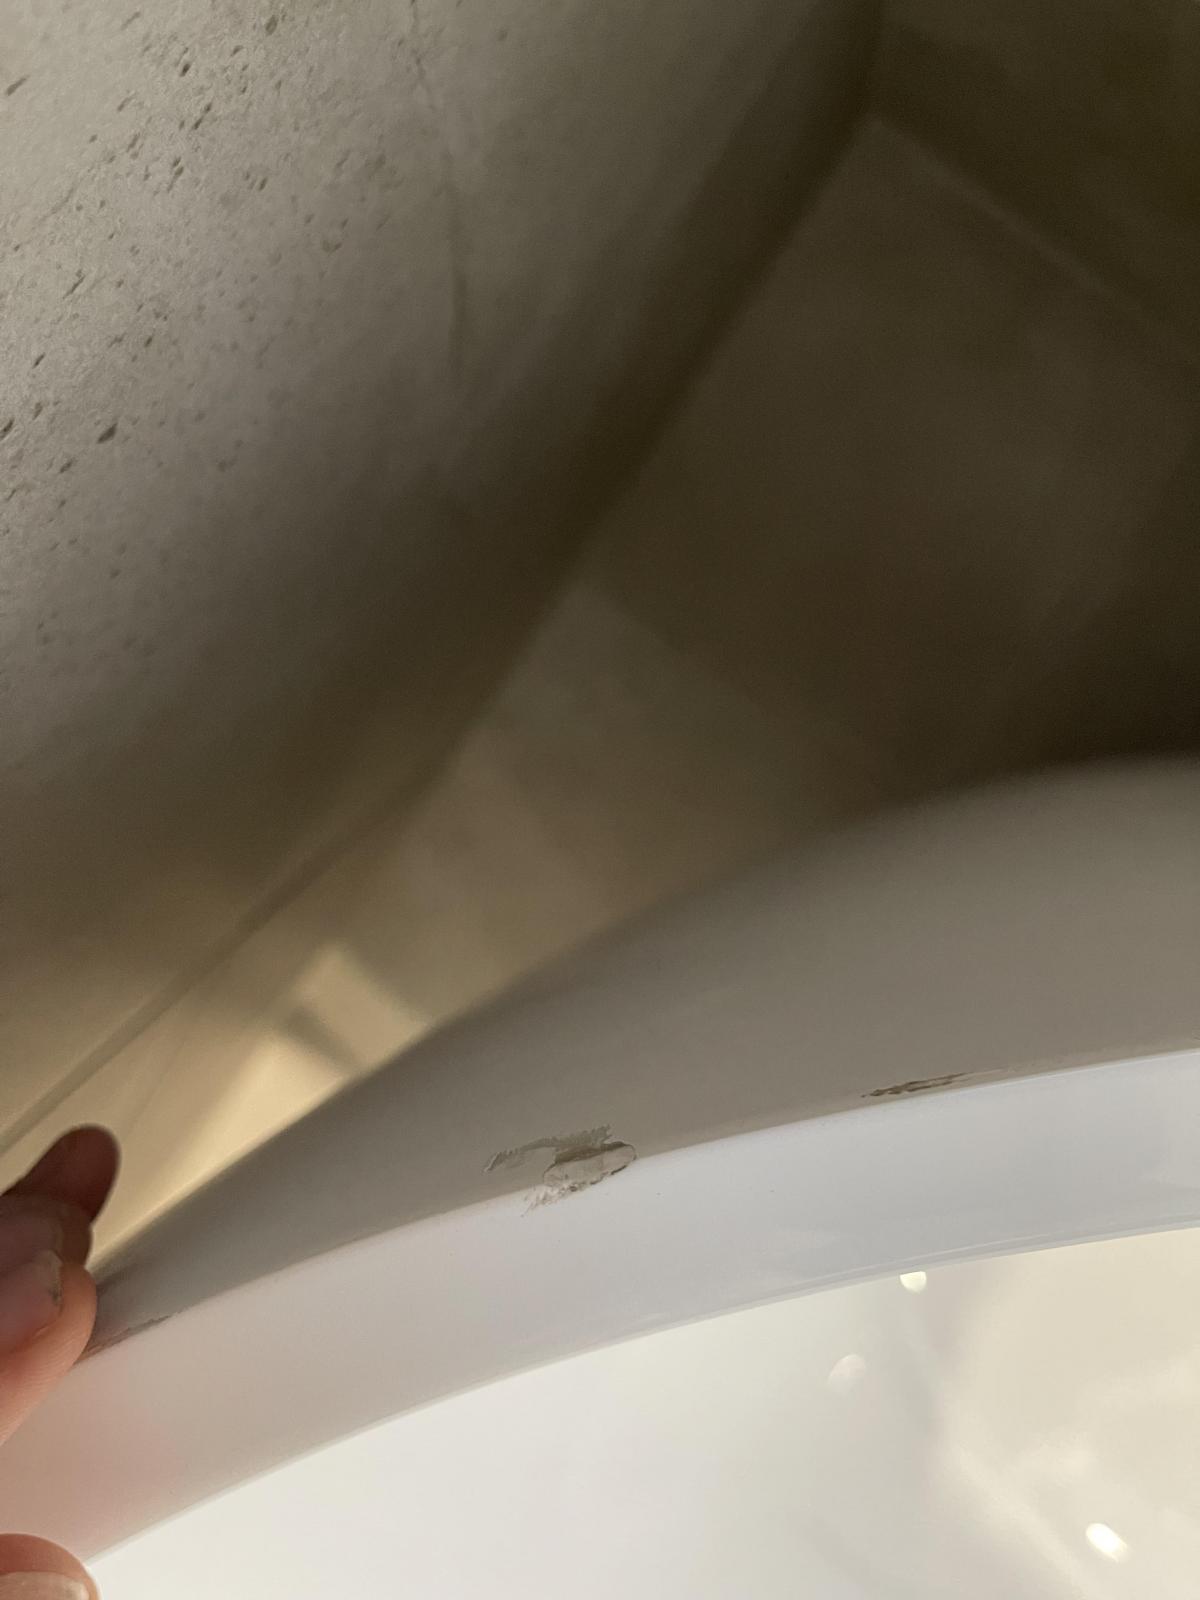 Builder chipped freestanding bath - do I have the right to h